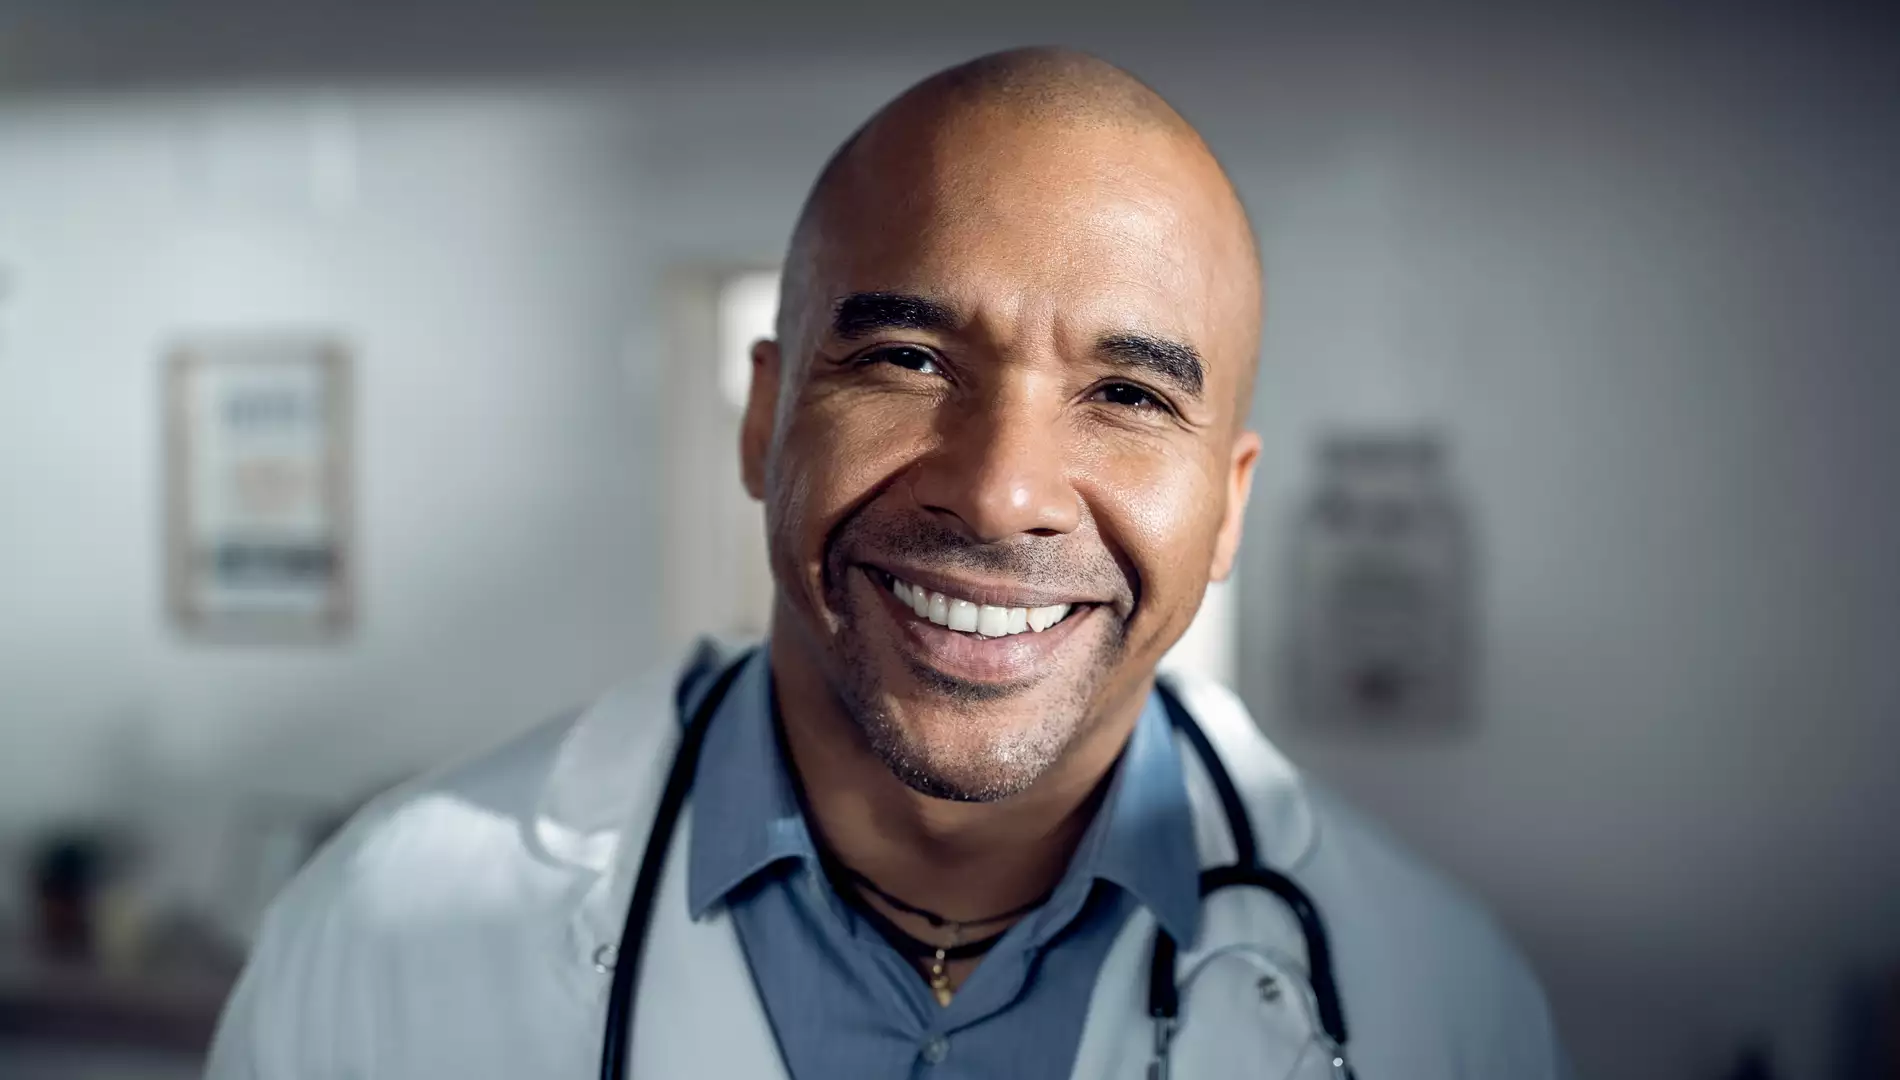 This is an image of a doctor. 